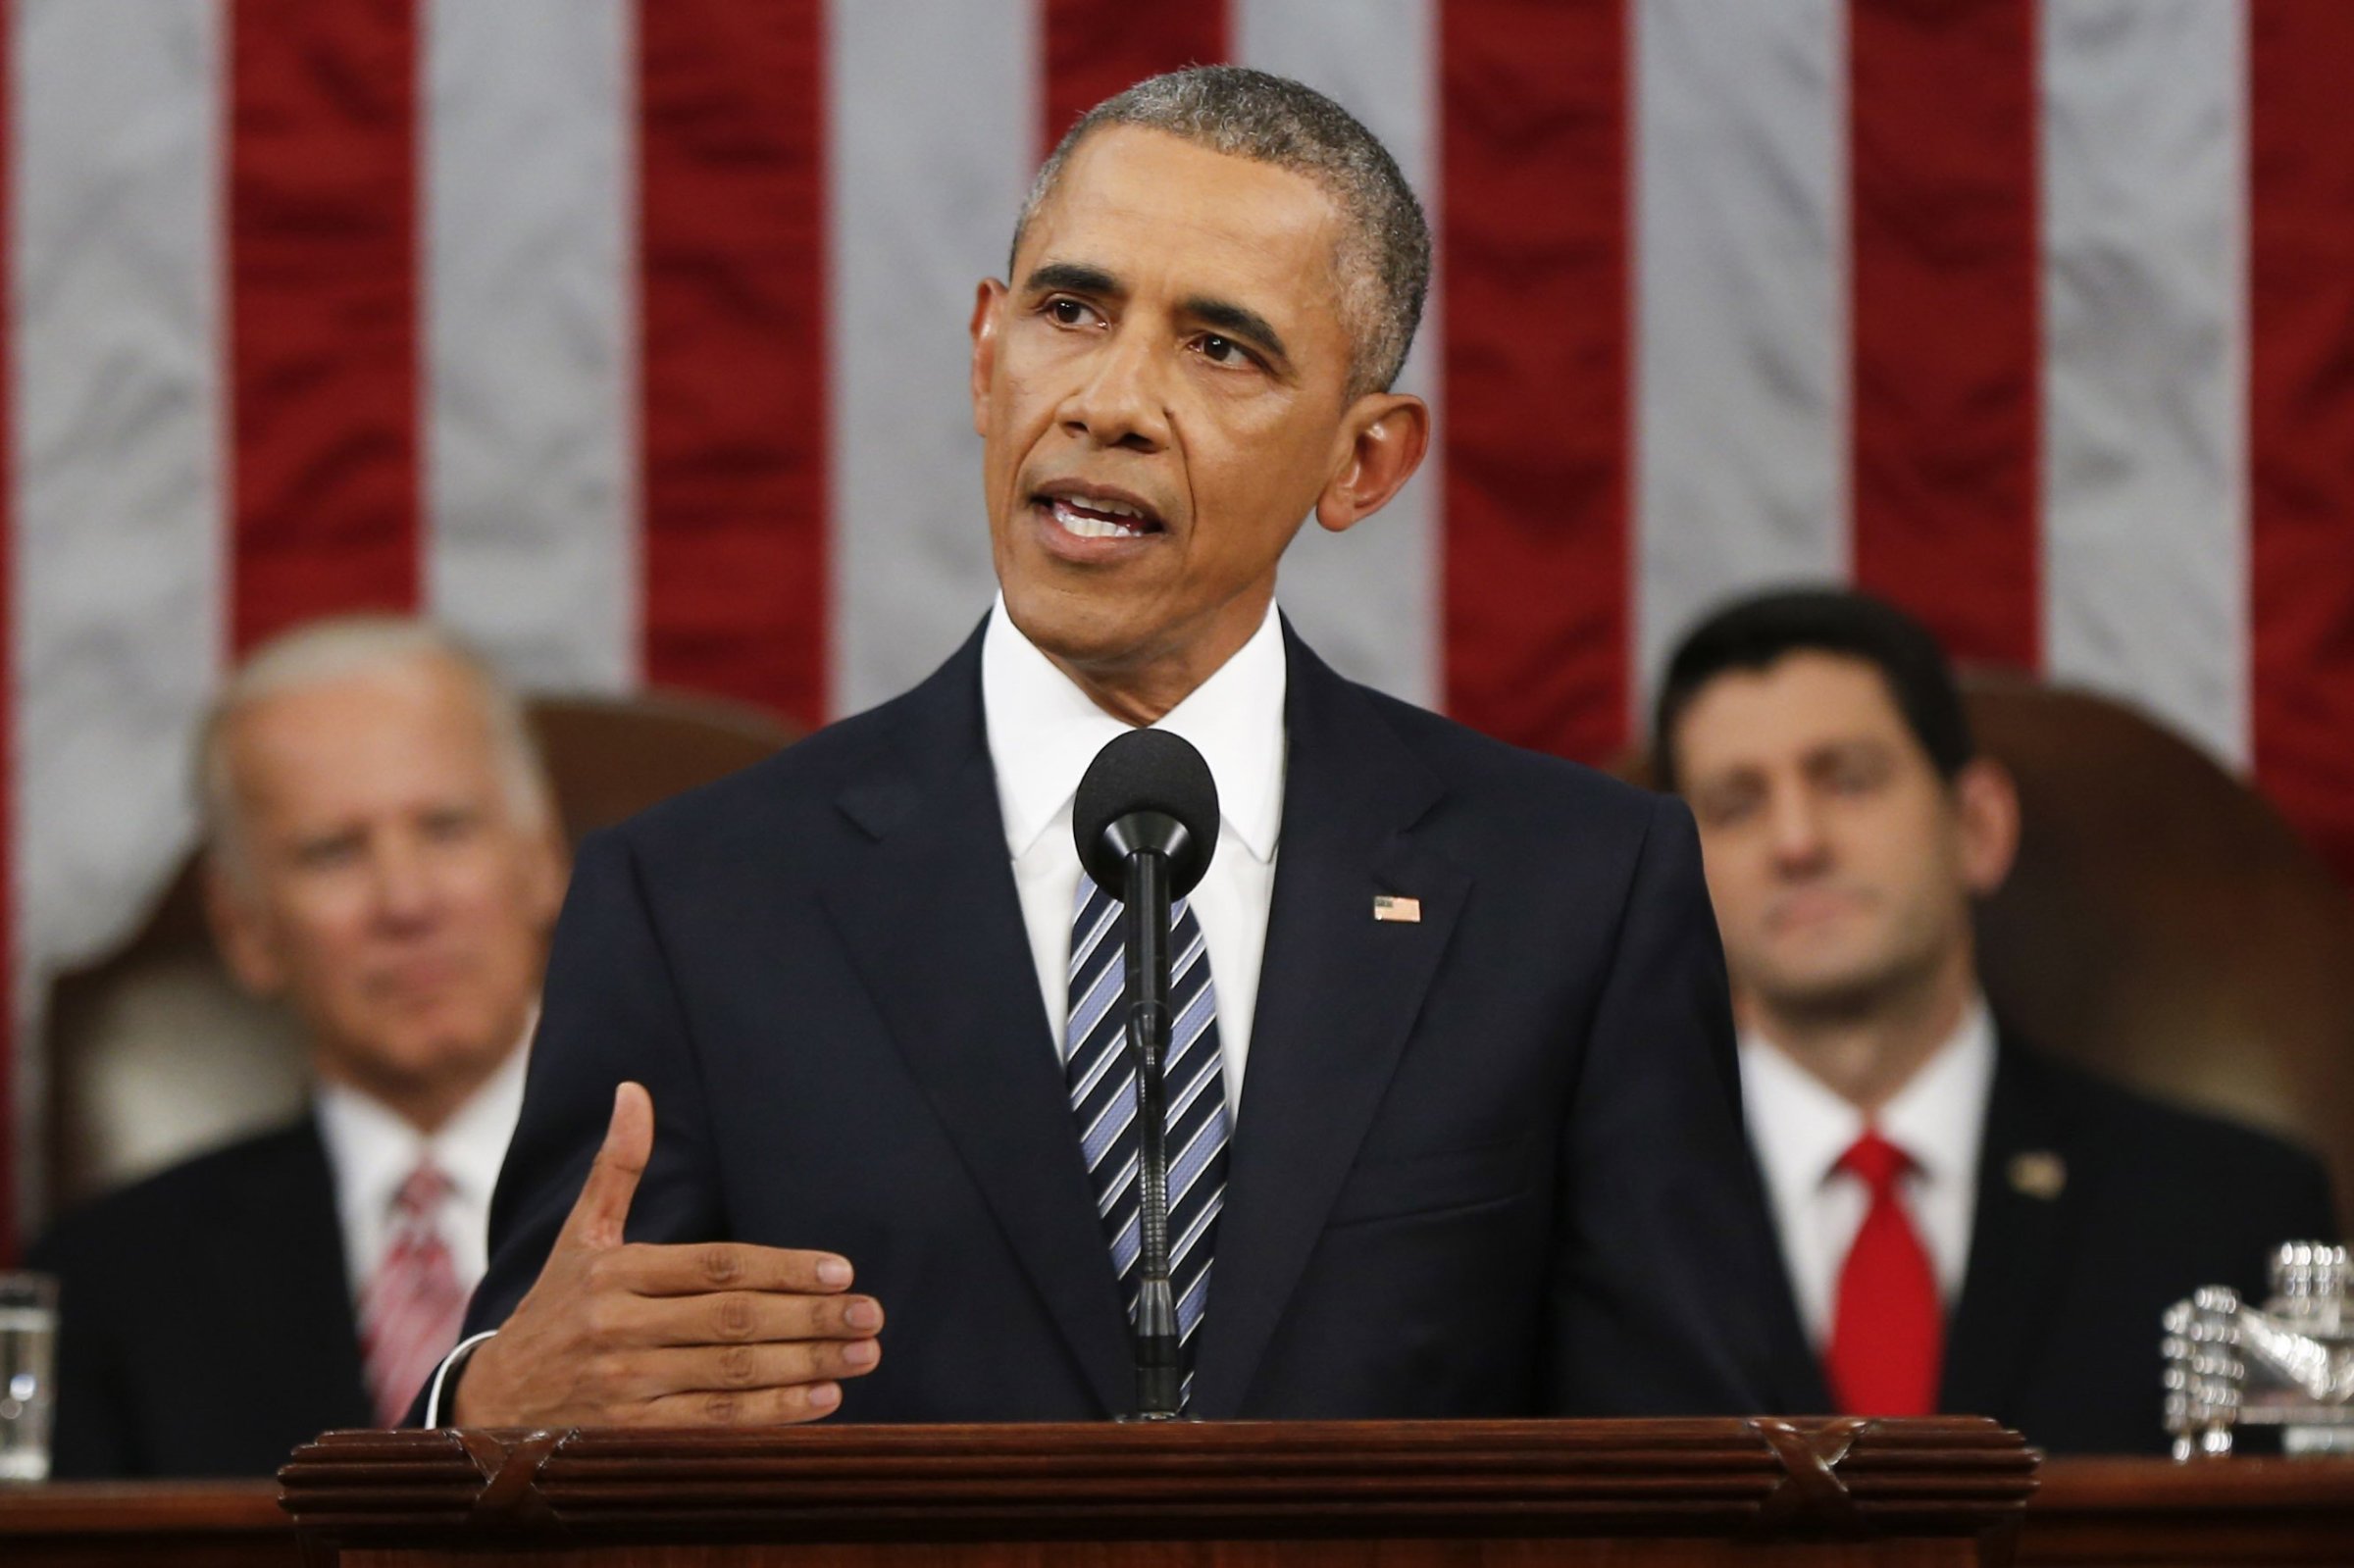 President Barack Obama delivers his State of the Union address before a joint session of Congress on Capitol Hill January 12, 2016 in Washington, D.C.